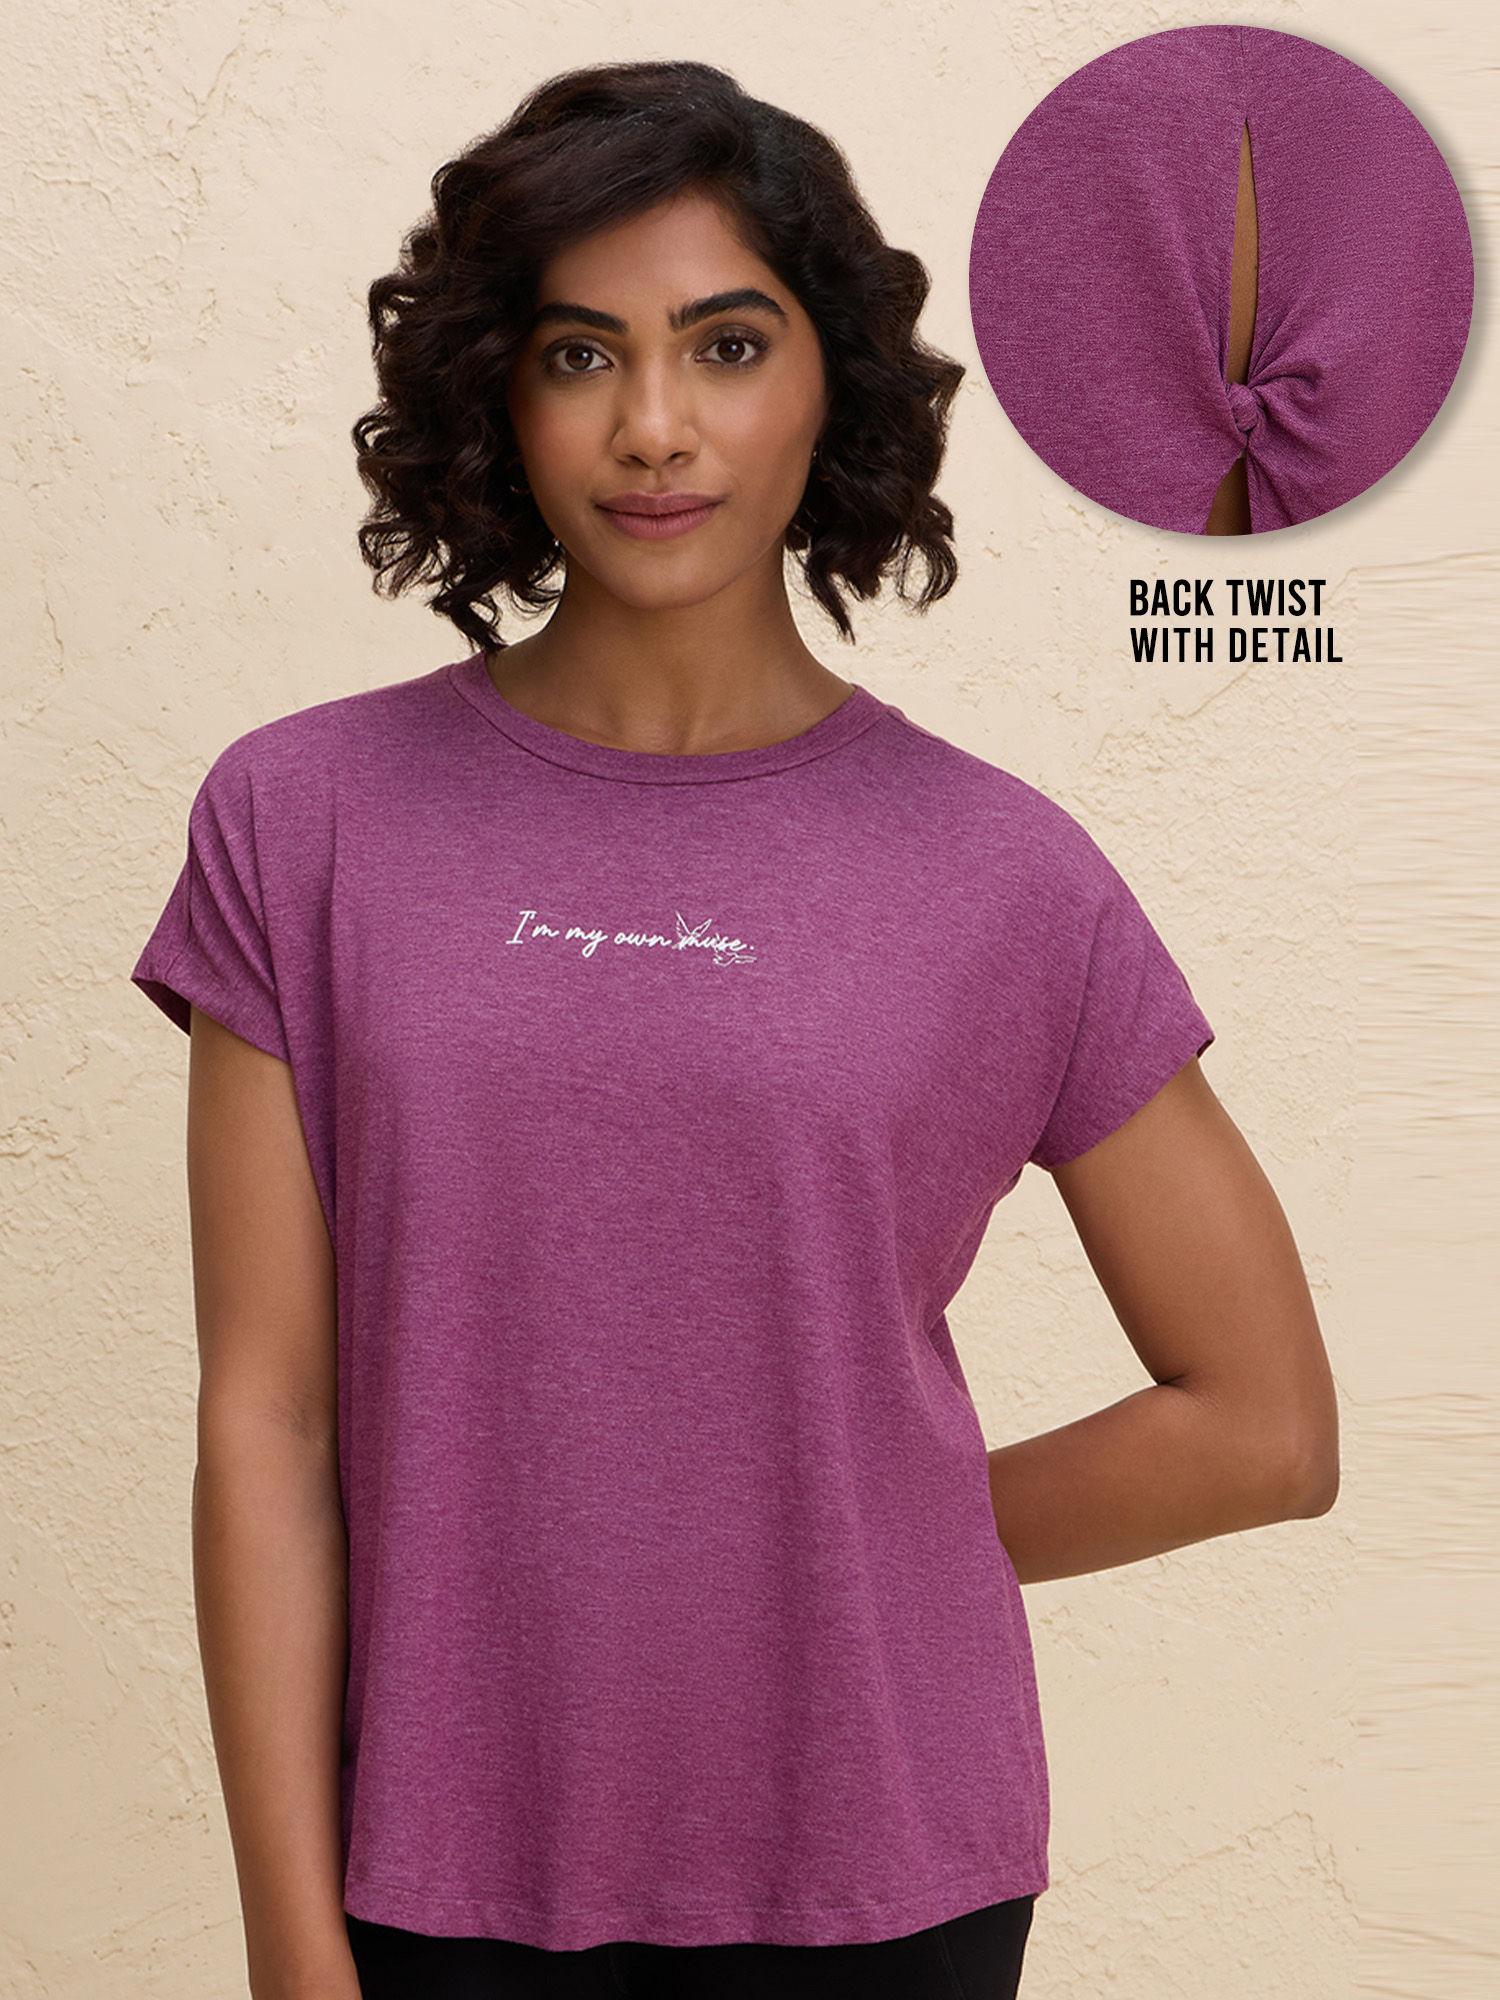 super comfy relaxed fit tee with stylish back knot detail-nyat279-wine